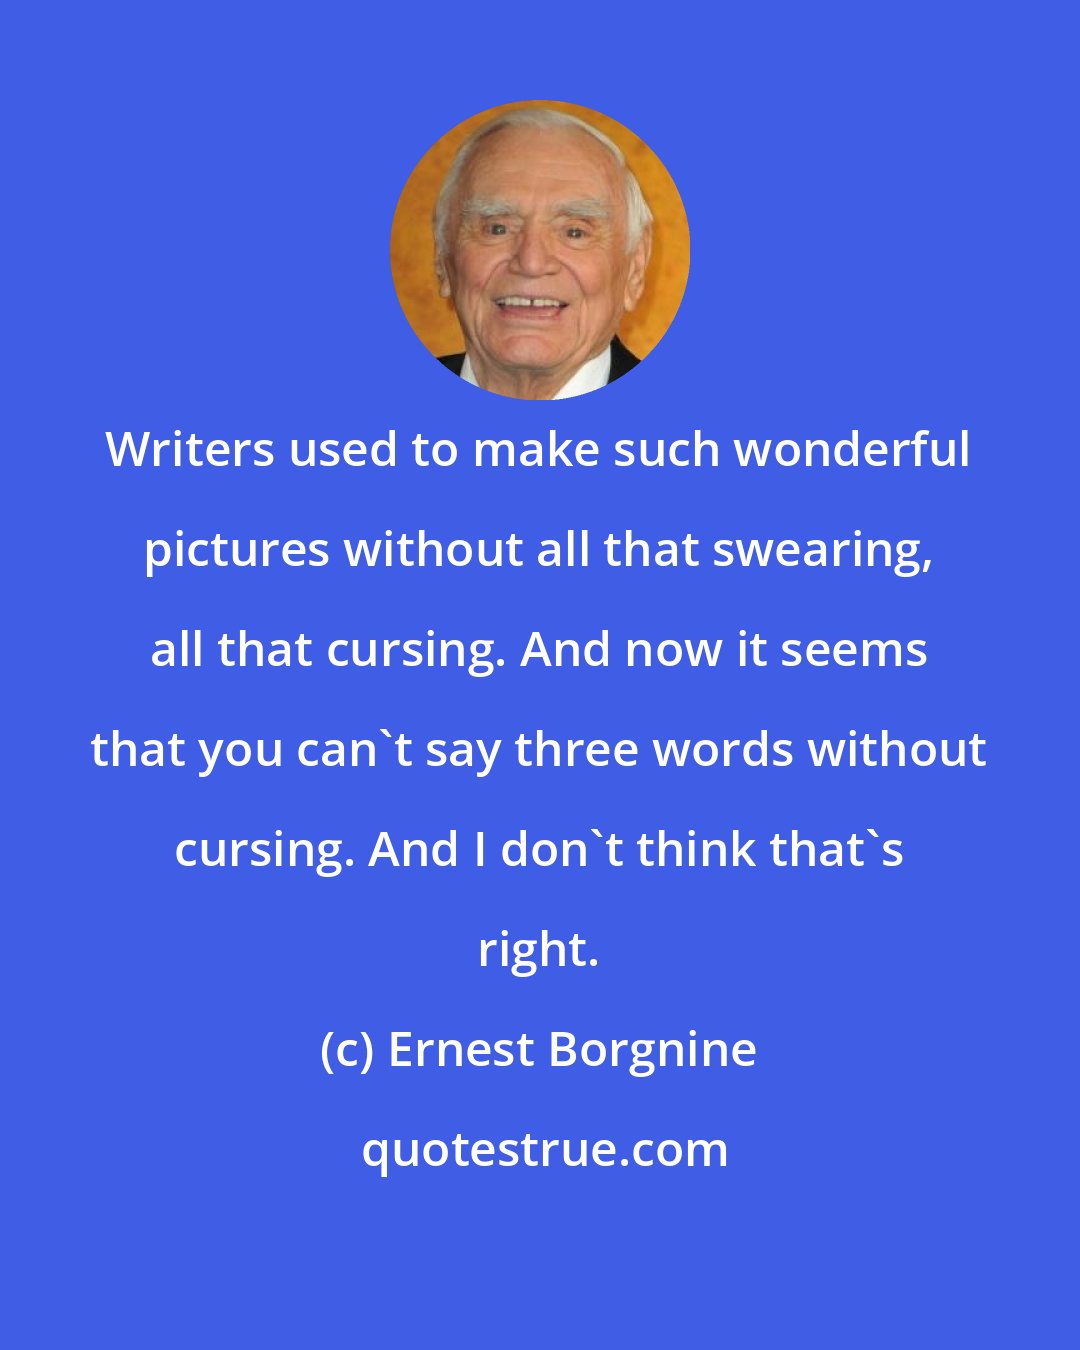 Ernest Borgnine: Writers used to make such wonderful pictures without all that swearing, all that cursing. And now it seems that you can't say three words without cursing. And I don't think that's right.